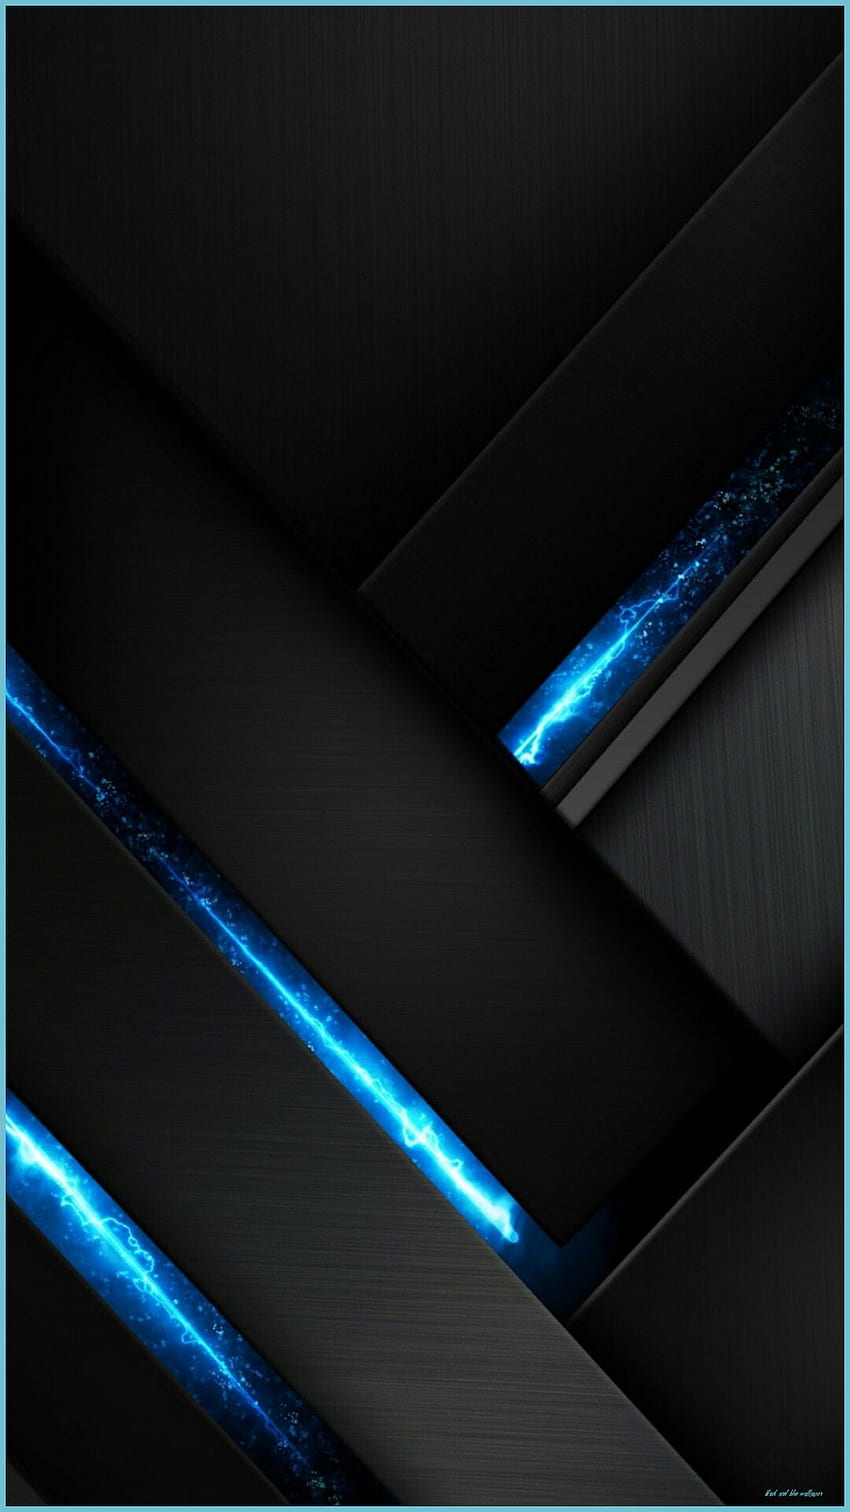 Abstract Black And Blue Background, Abstract, Black, Blue Background Image  And Wallpaper for Free Download